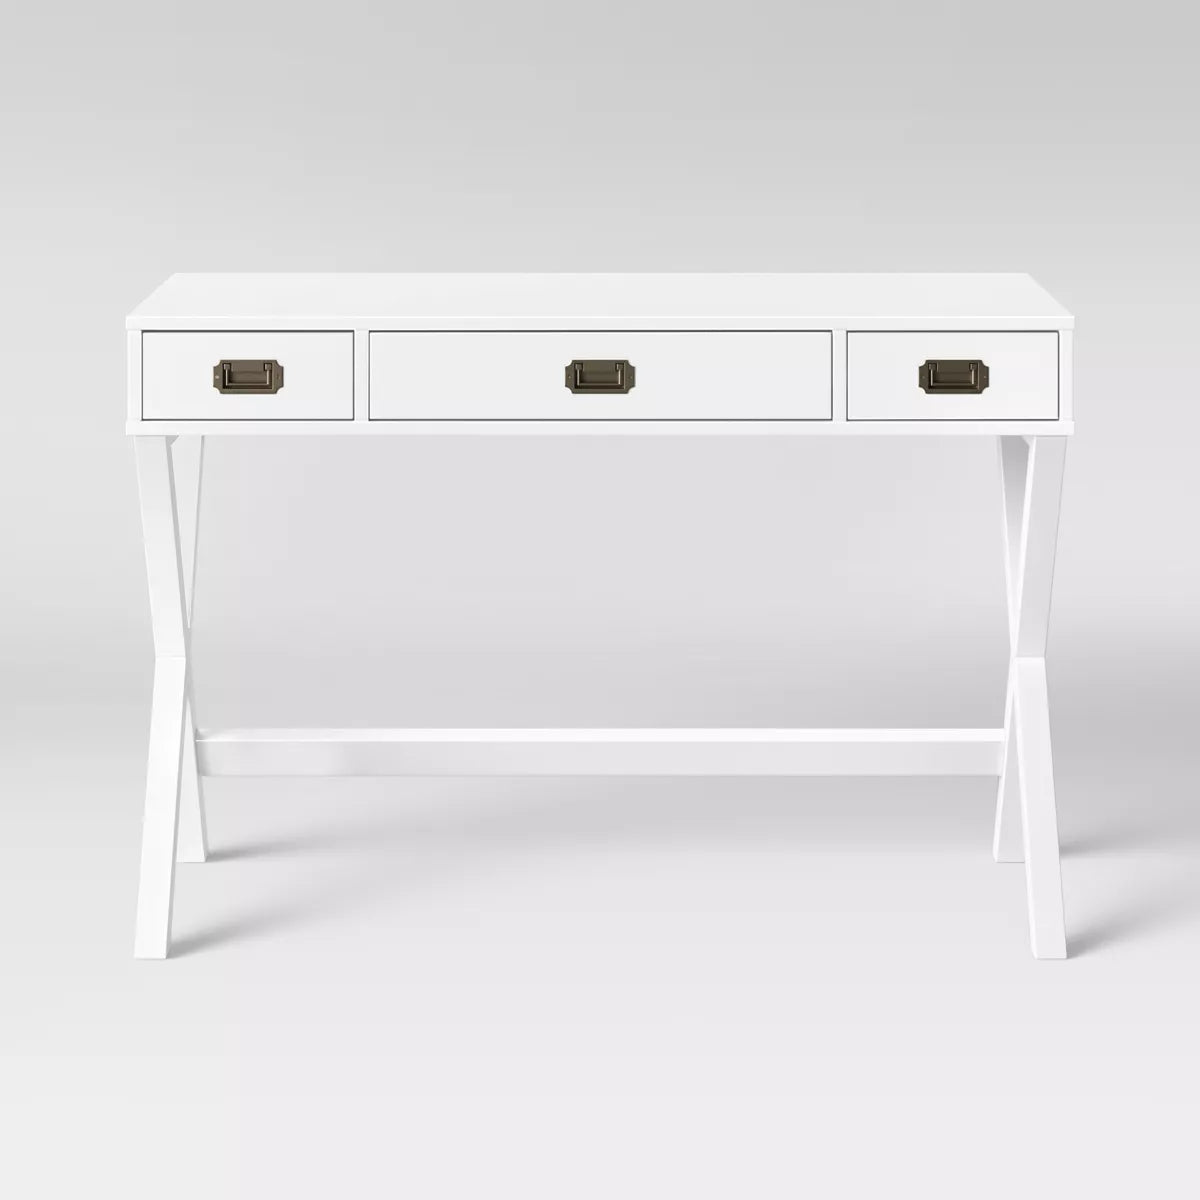 Campaign Wood Writing Desk with Drawers - Threshold™